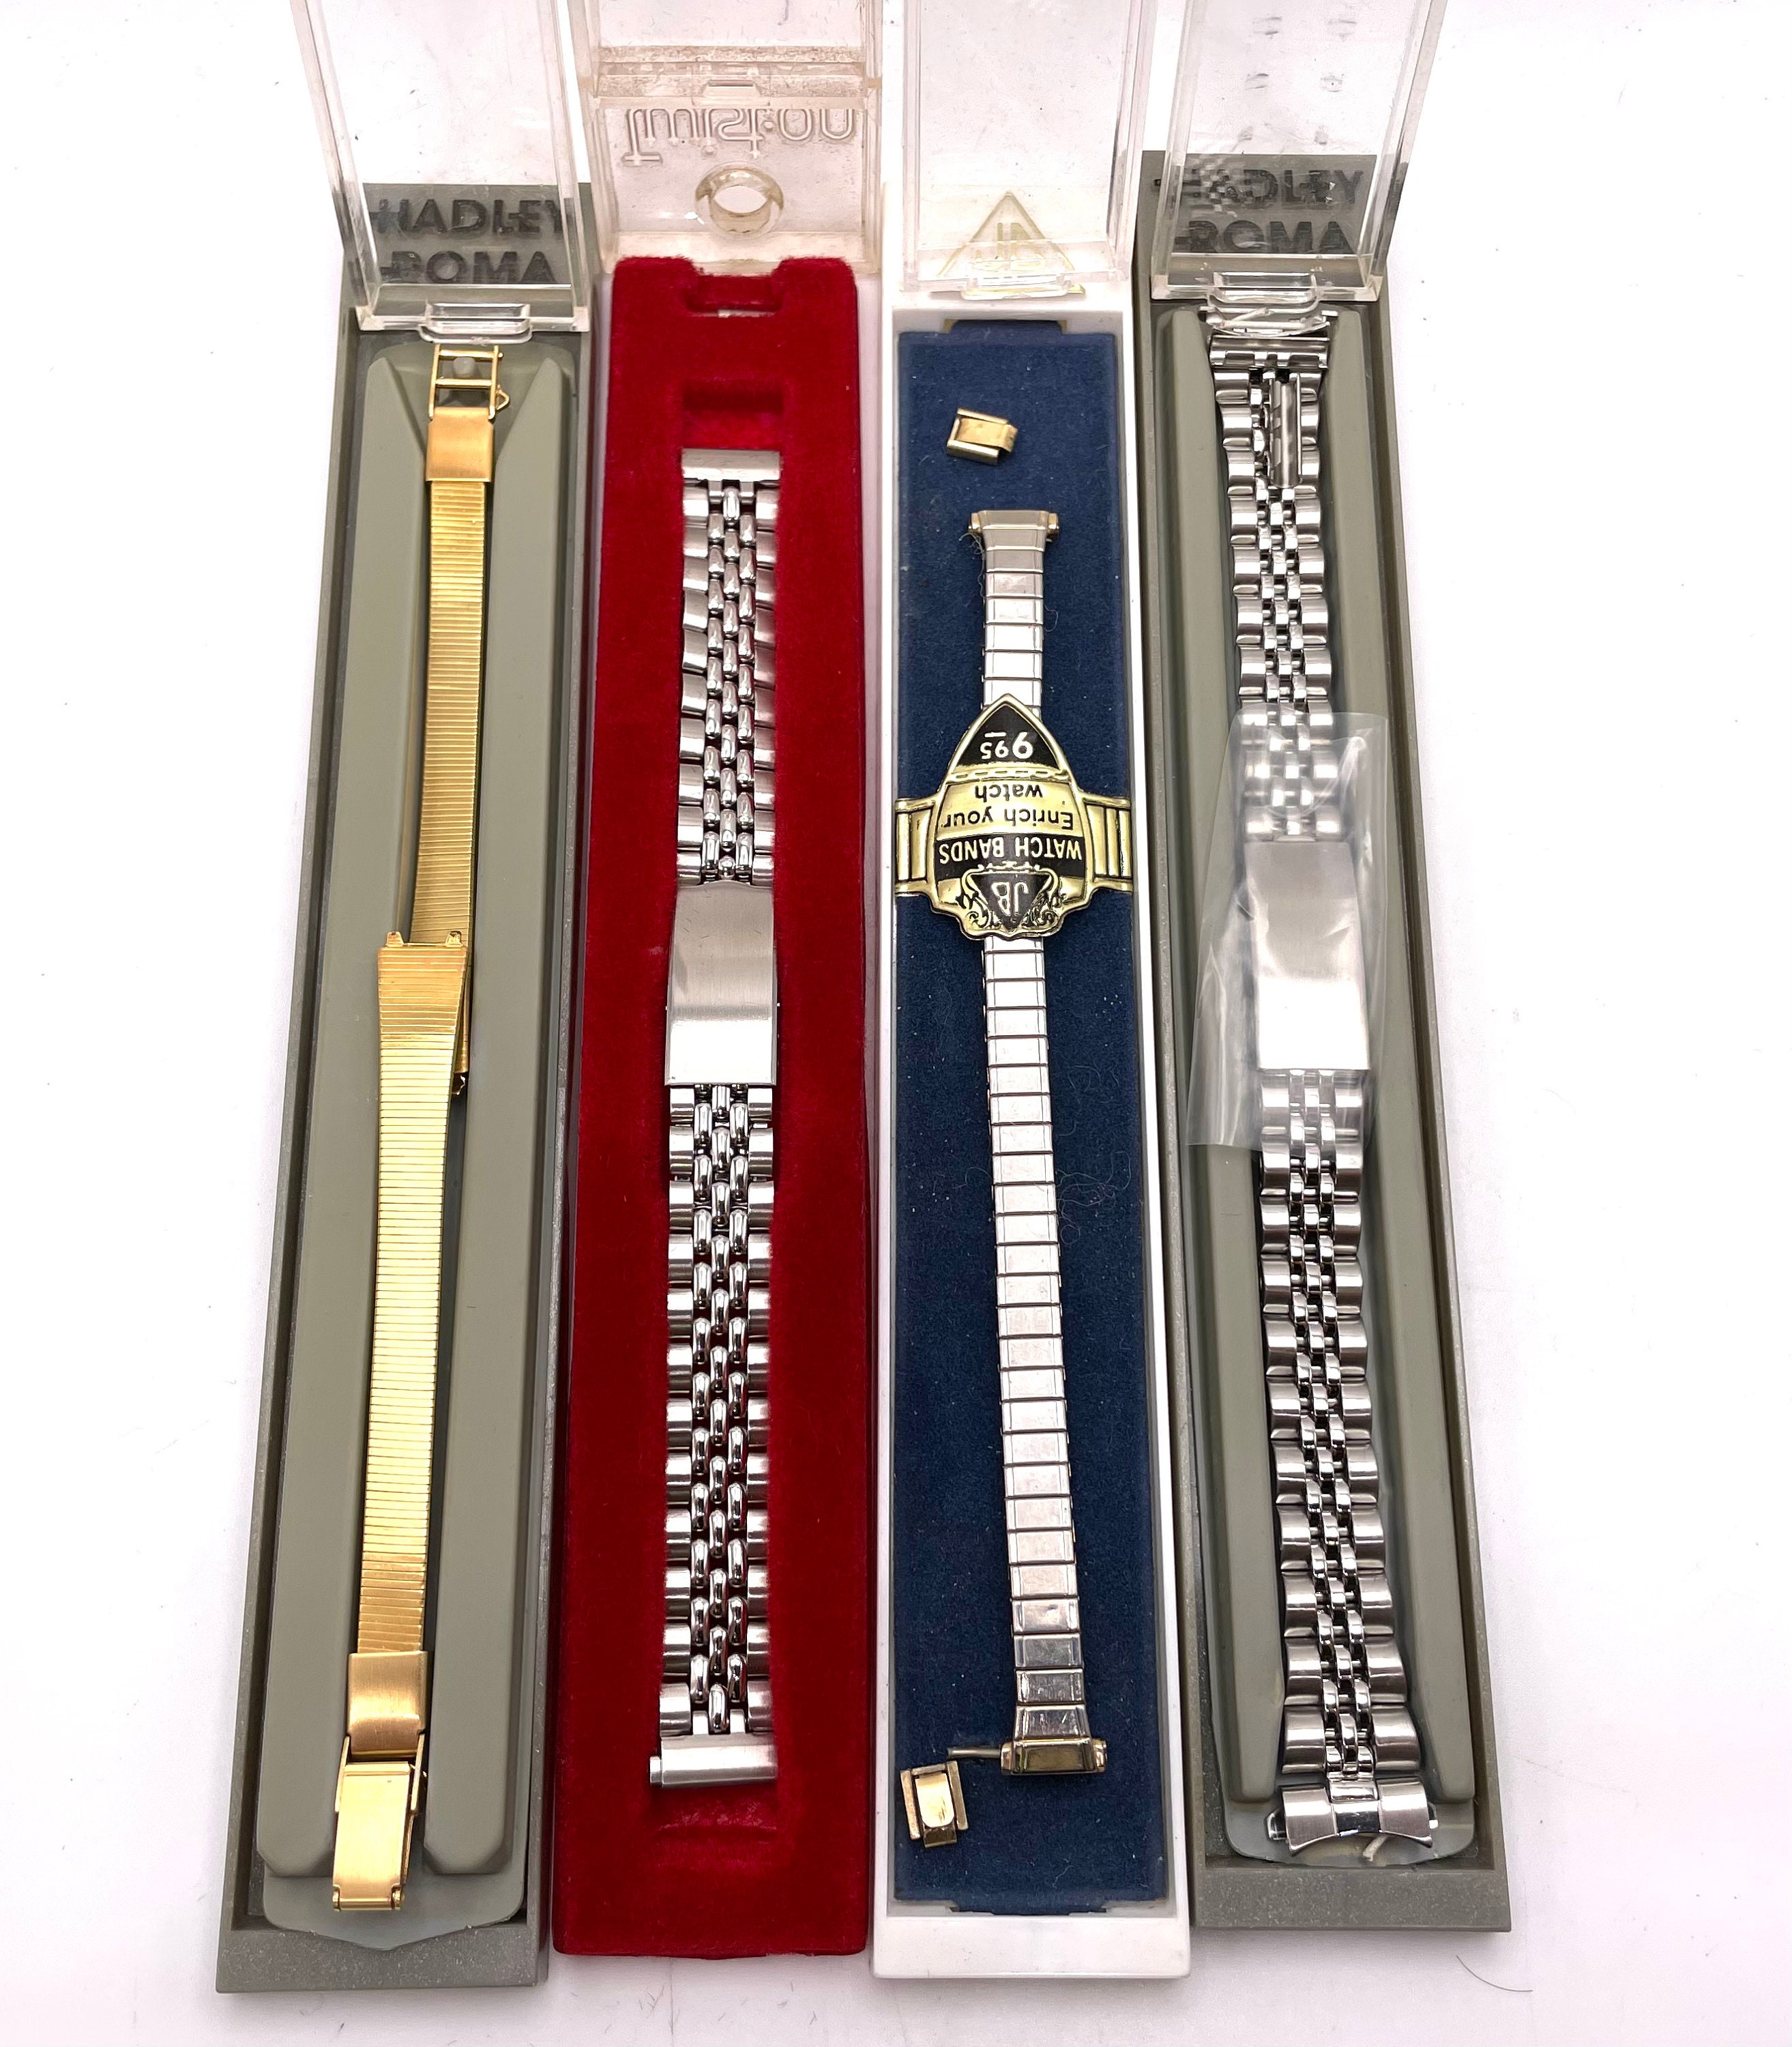 Groove Life Tampa Bay Buccaneers Super Bowl LV Champions 38-40mm Limited  Edition Apple Watch Band